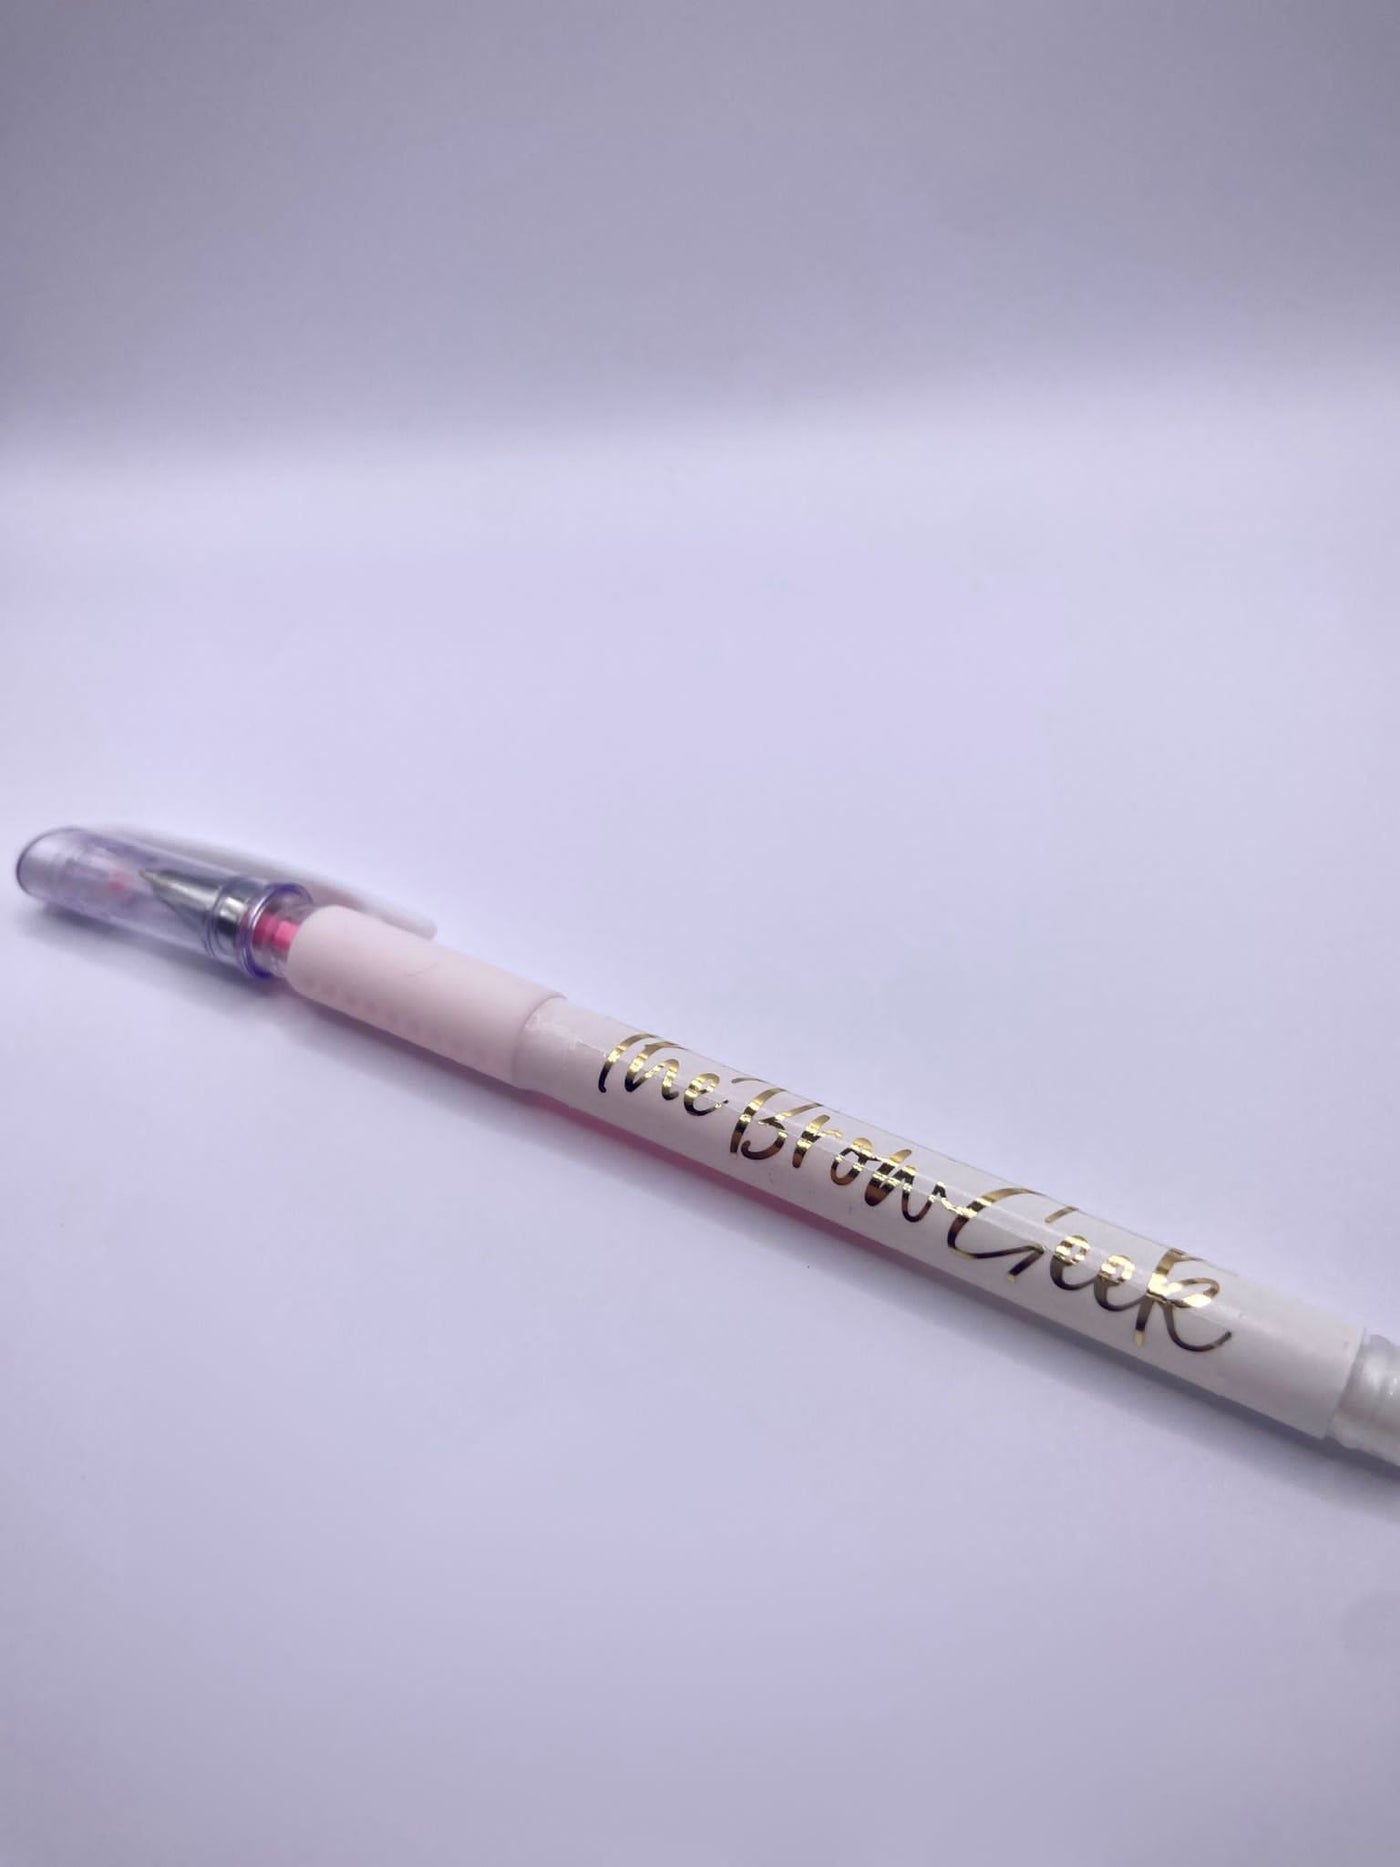 MicroArtistry Mapping Pen White or Pink! (New!) – MicroArtistry